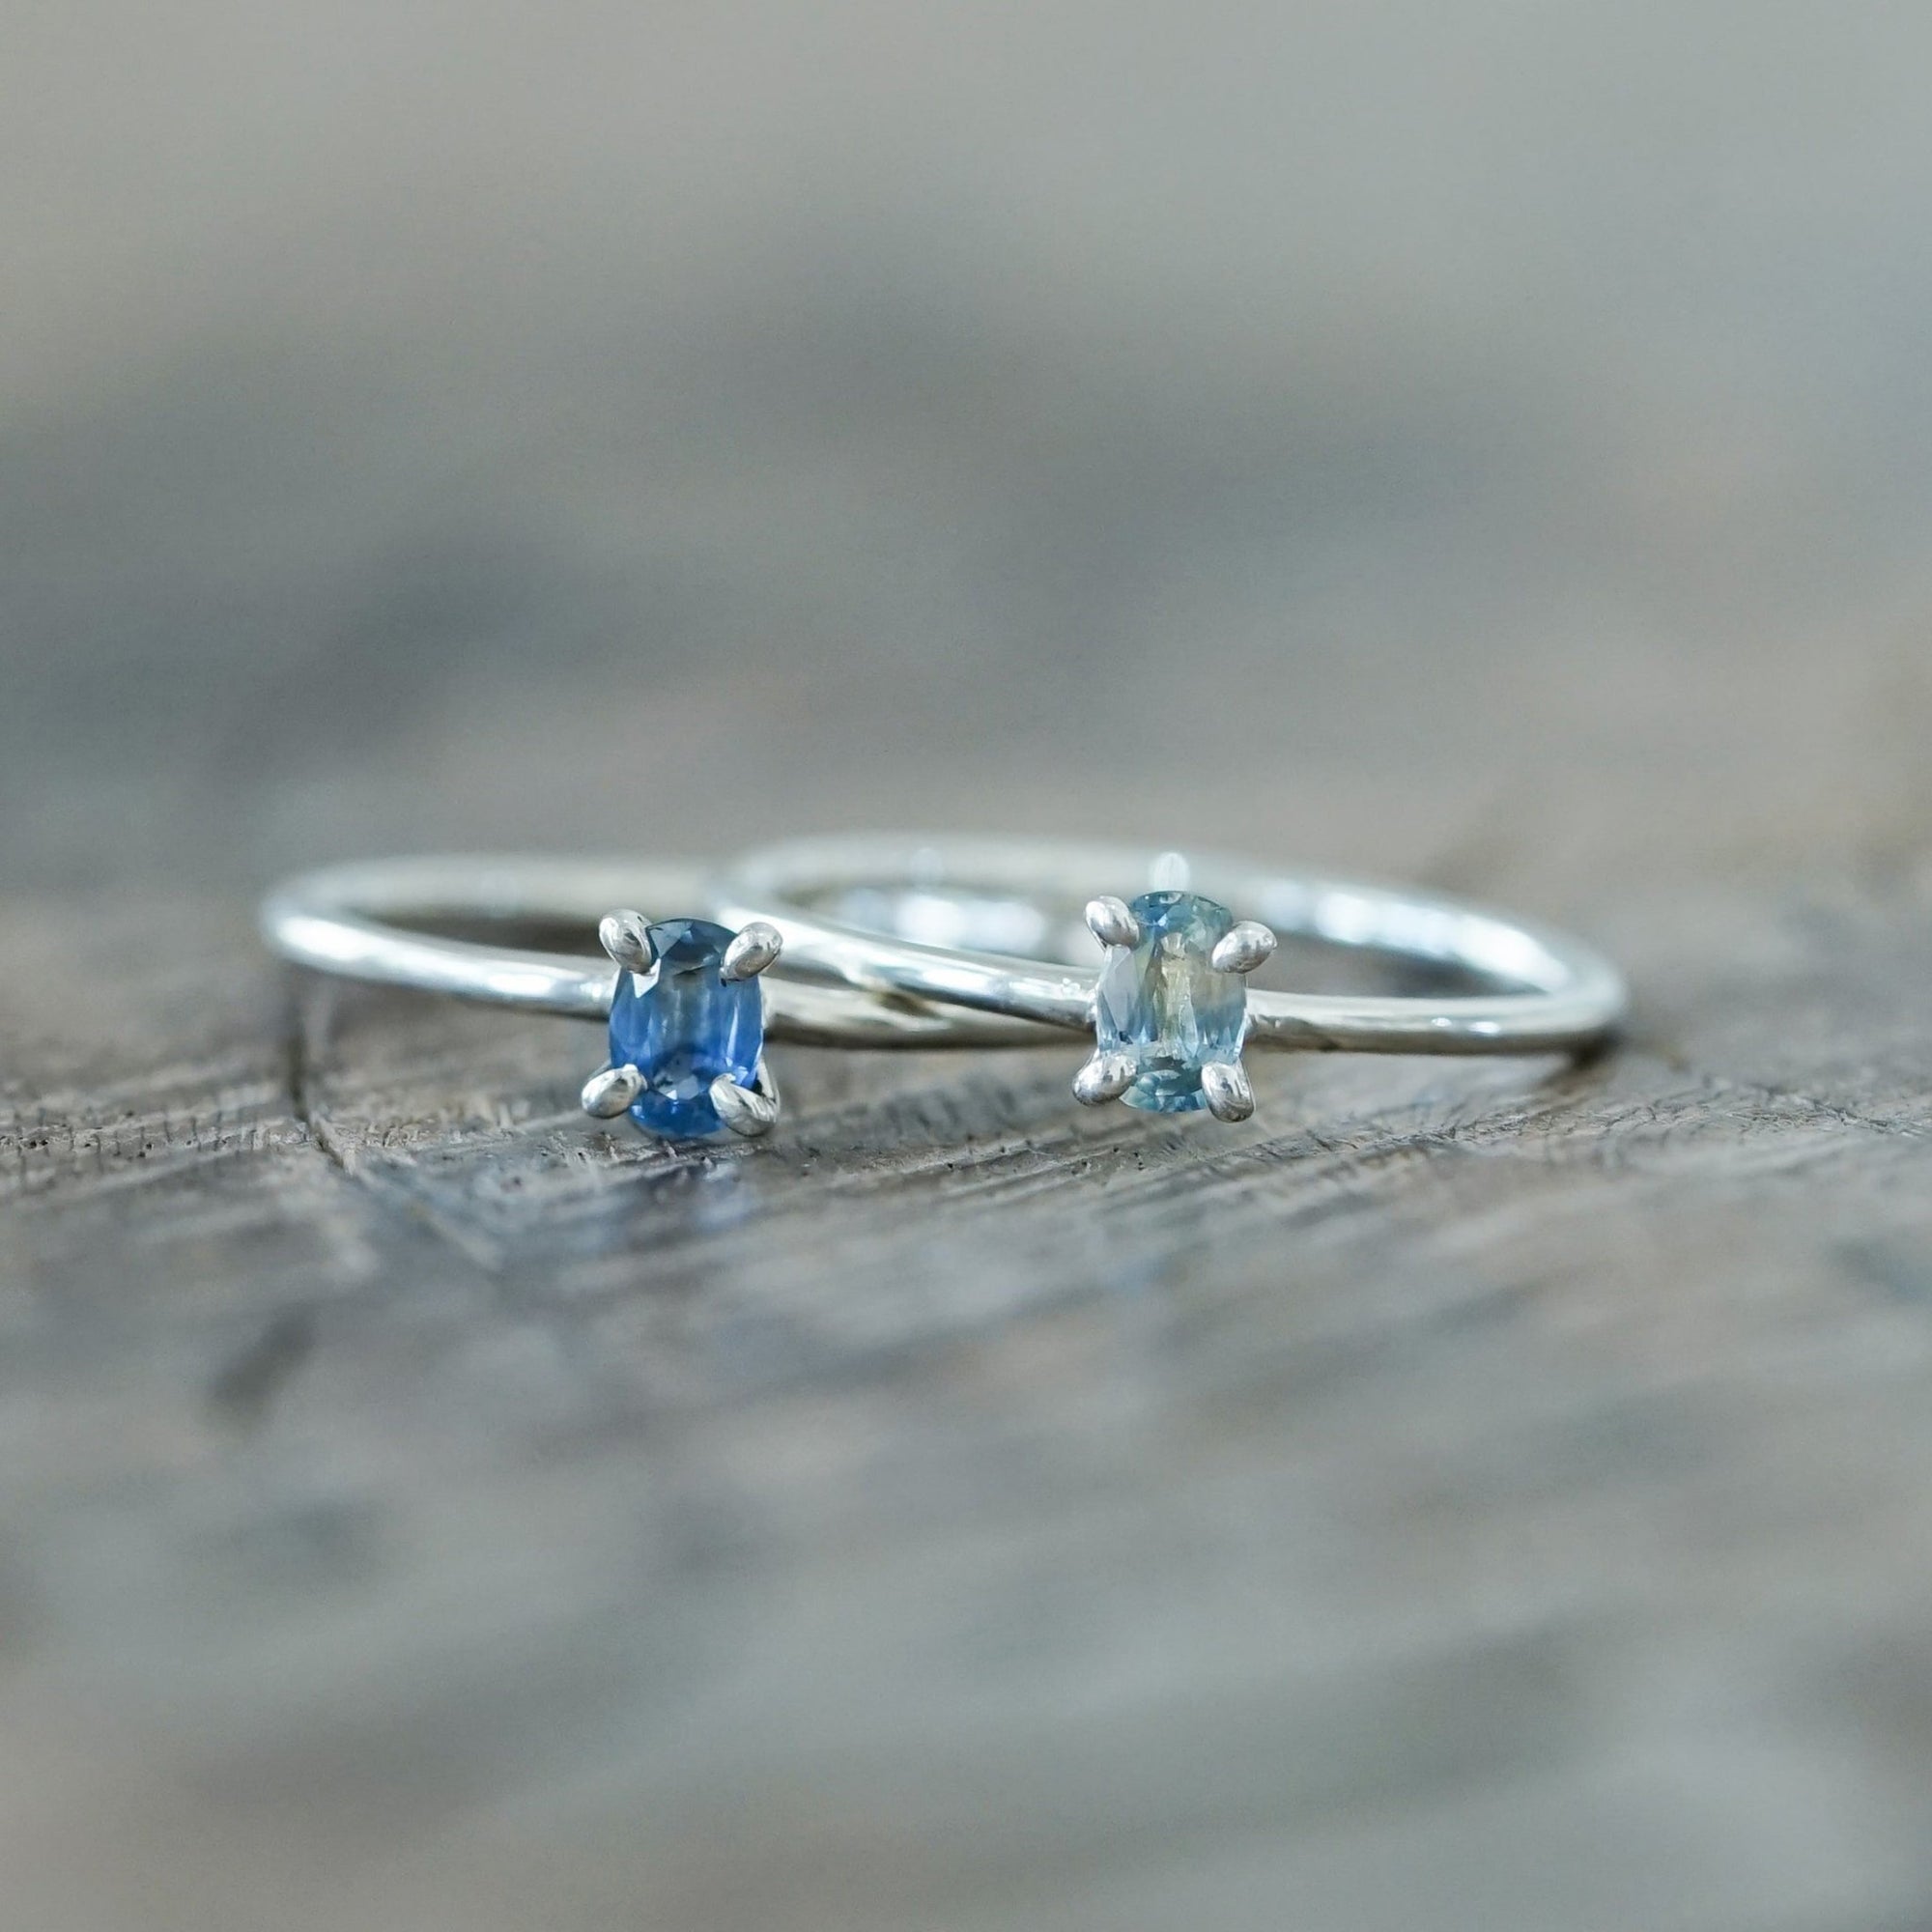 Bicolor Sapphire Ring - Gardens of the Sun | Ethical Jewelry